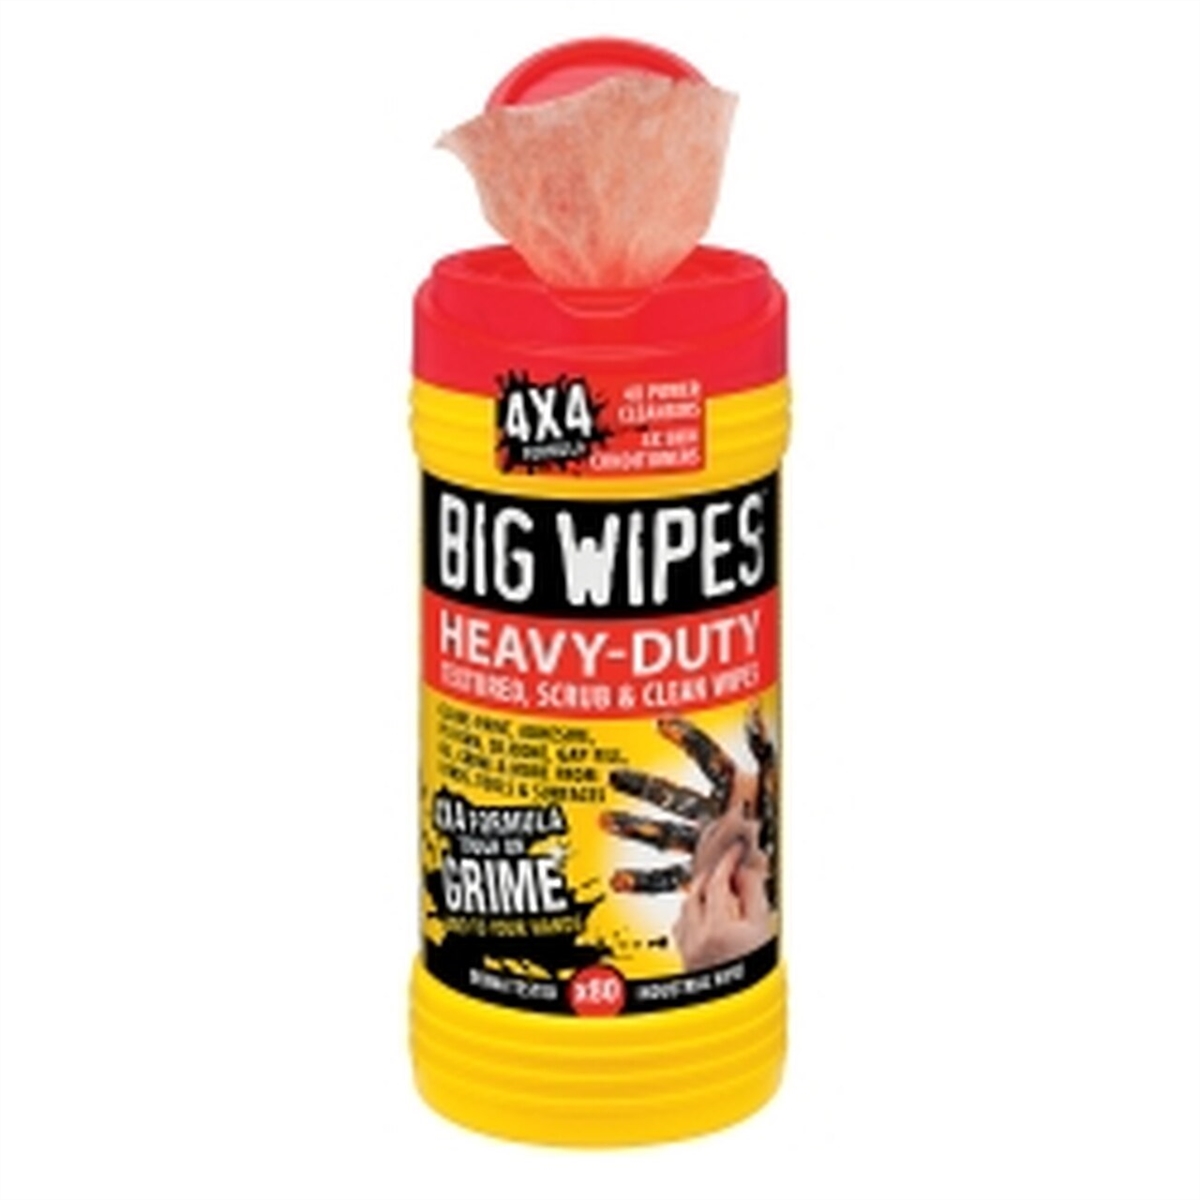 Picture of Big Wipes BWP6002-0046-2 8 x 11.5 in. Heavy Duty Anti Bacterial Hand Sanitizing Wipes - 80 Count - Case of 8